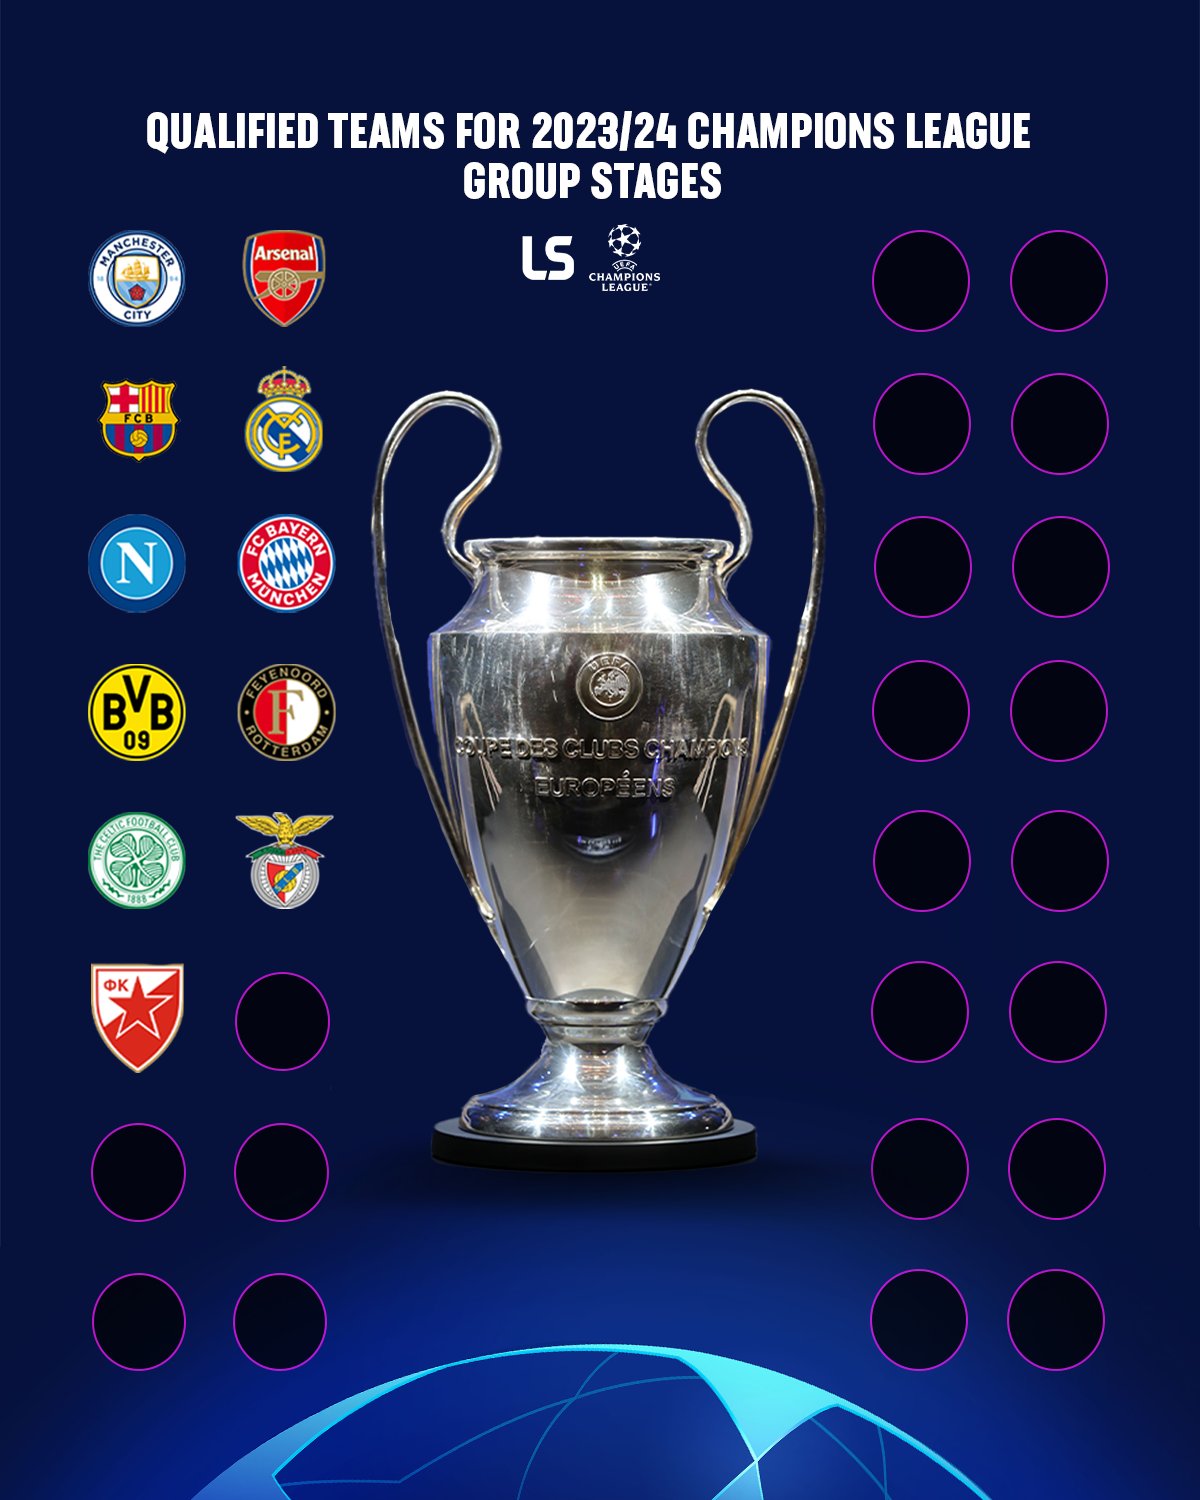 Here are the groups for the 2023/24 Champions League